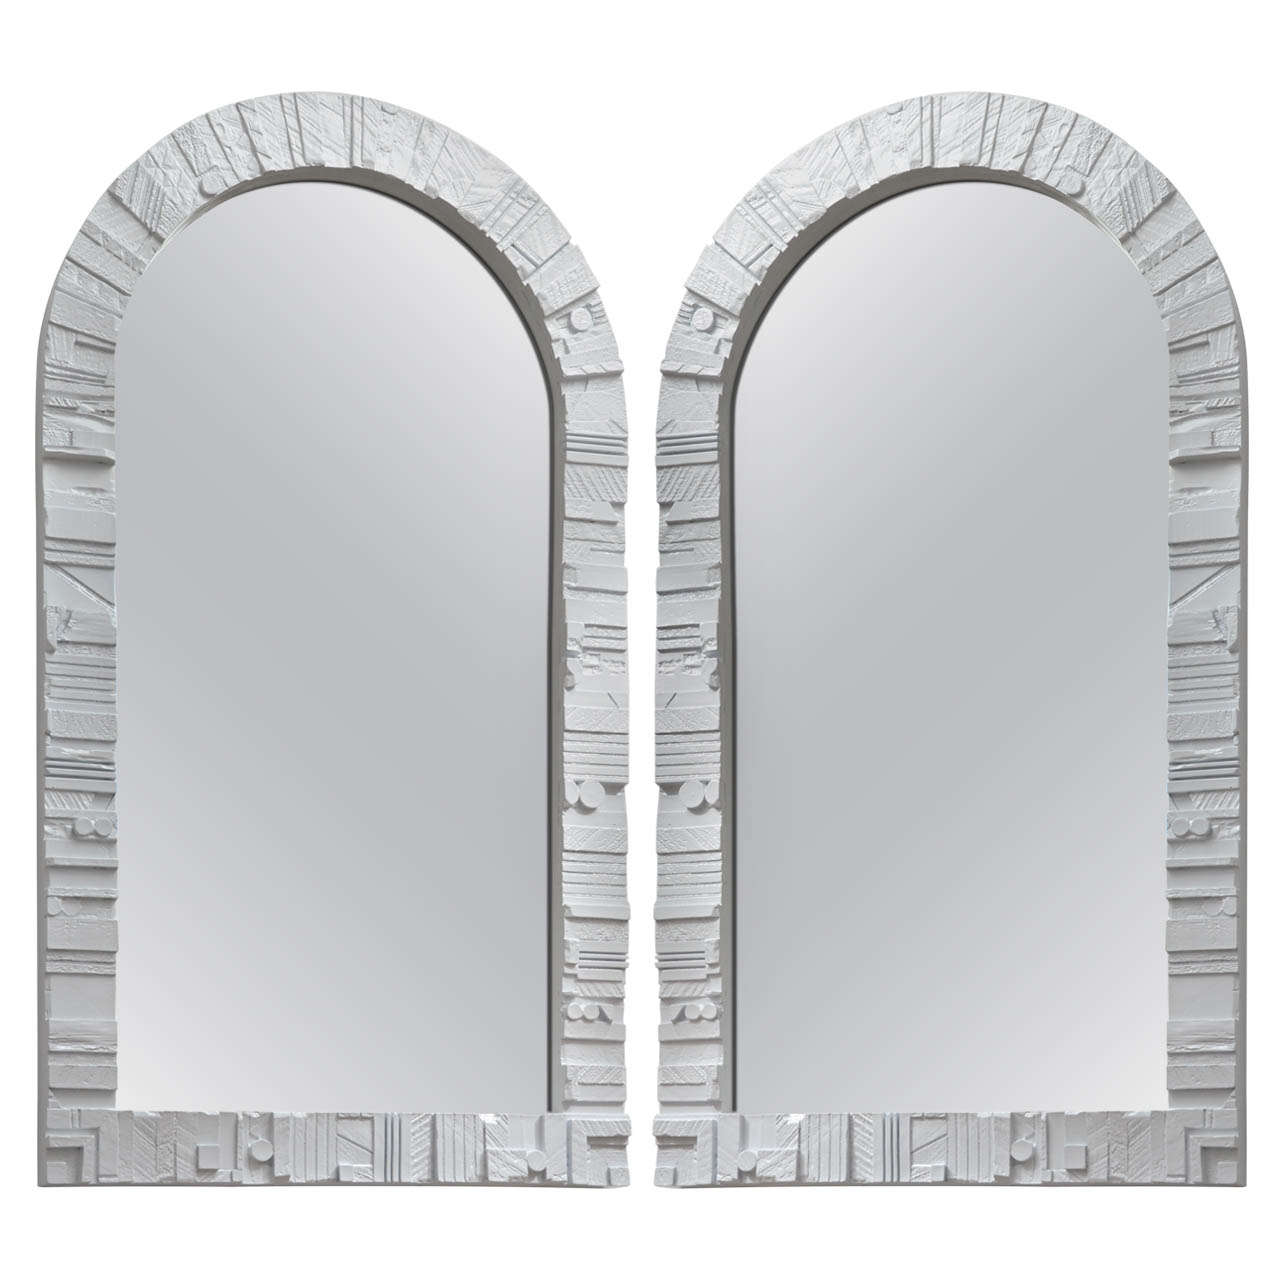 Pair of White Lacquered Wood Frame Arched Mirrors